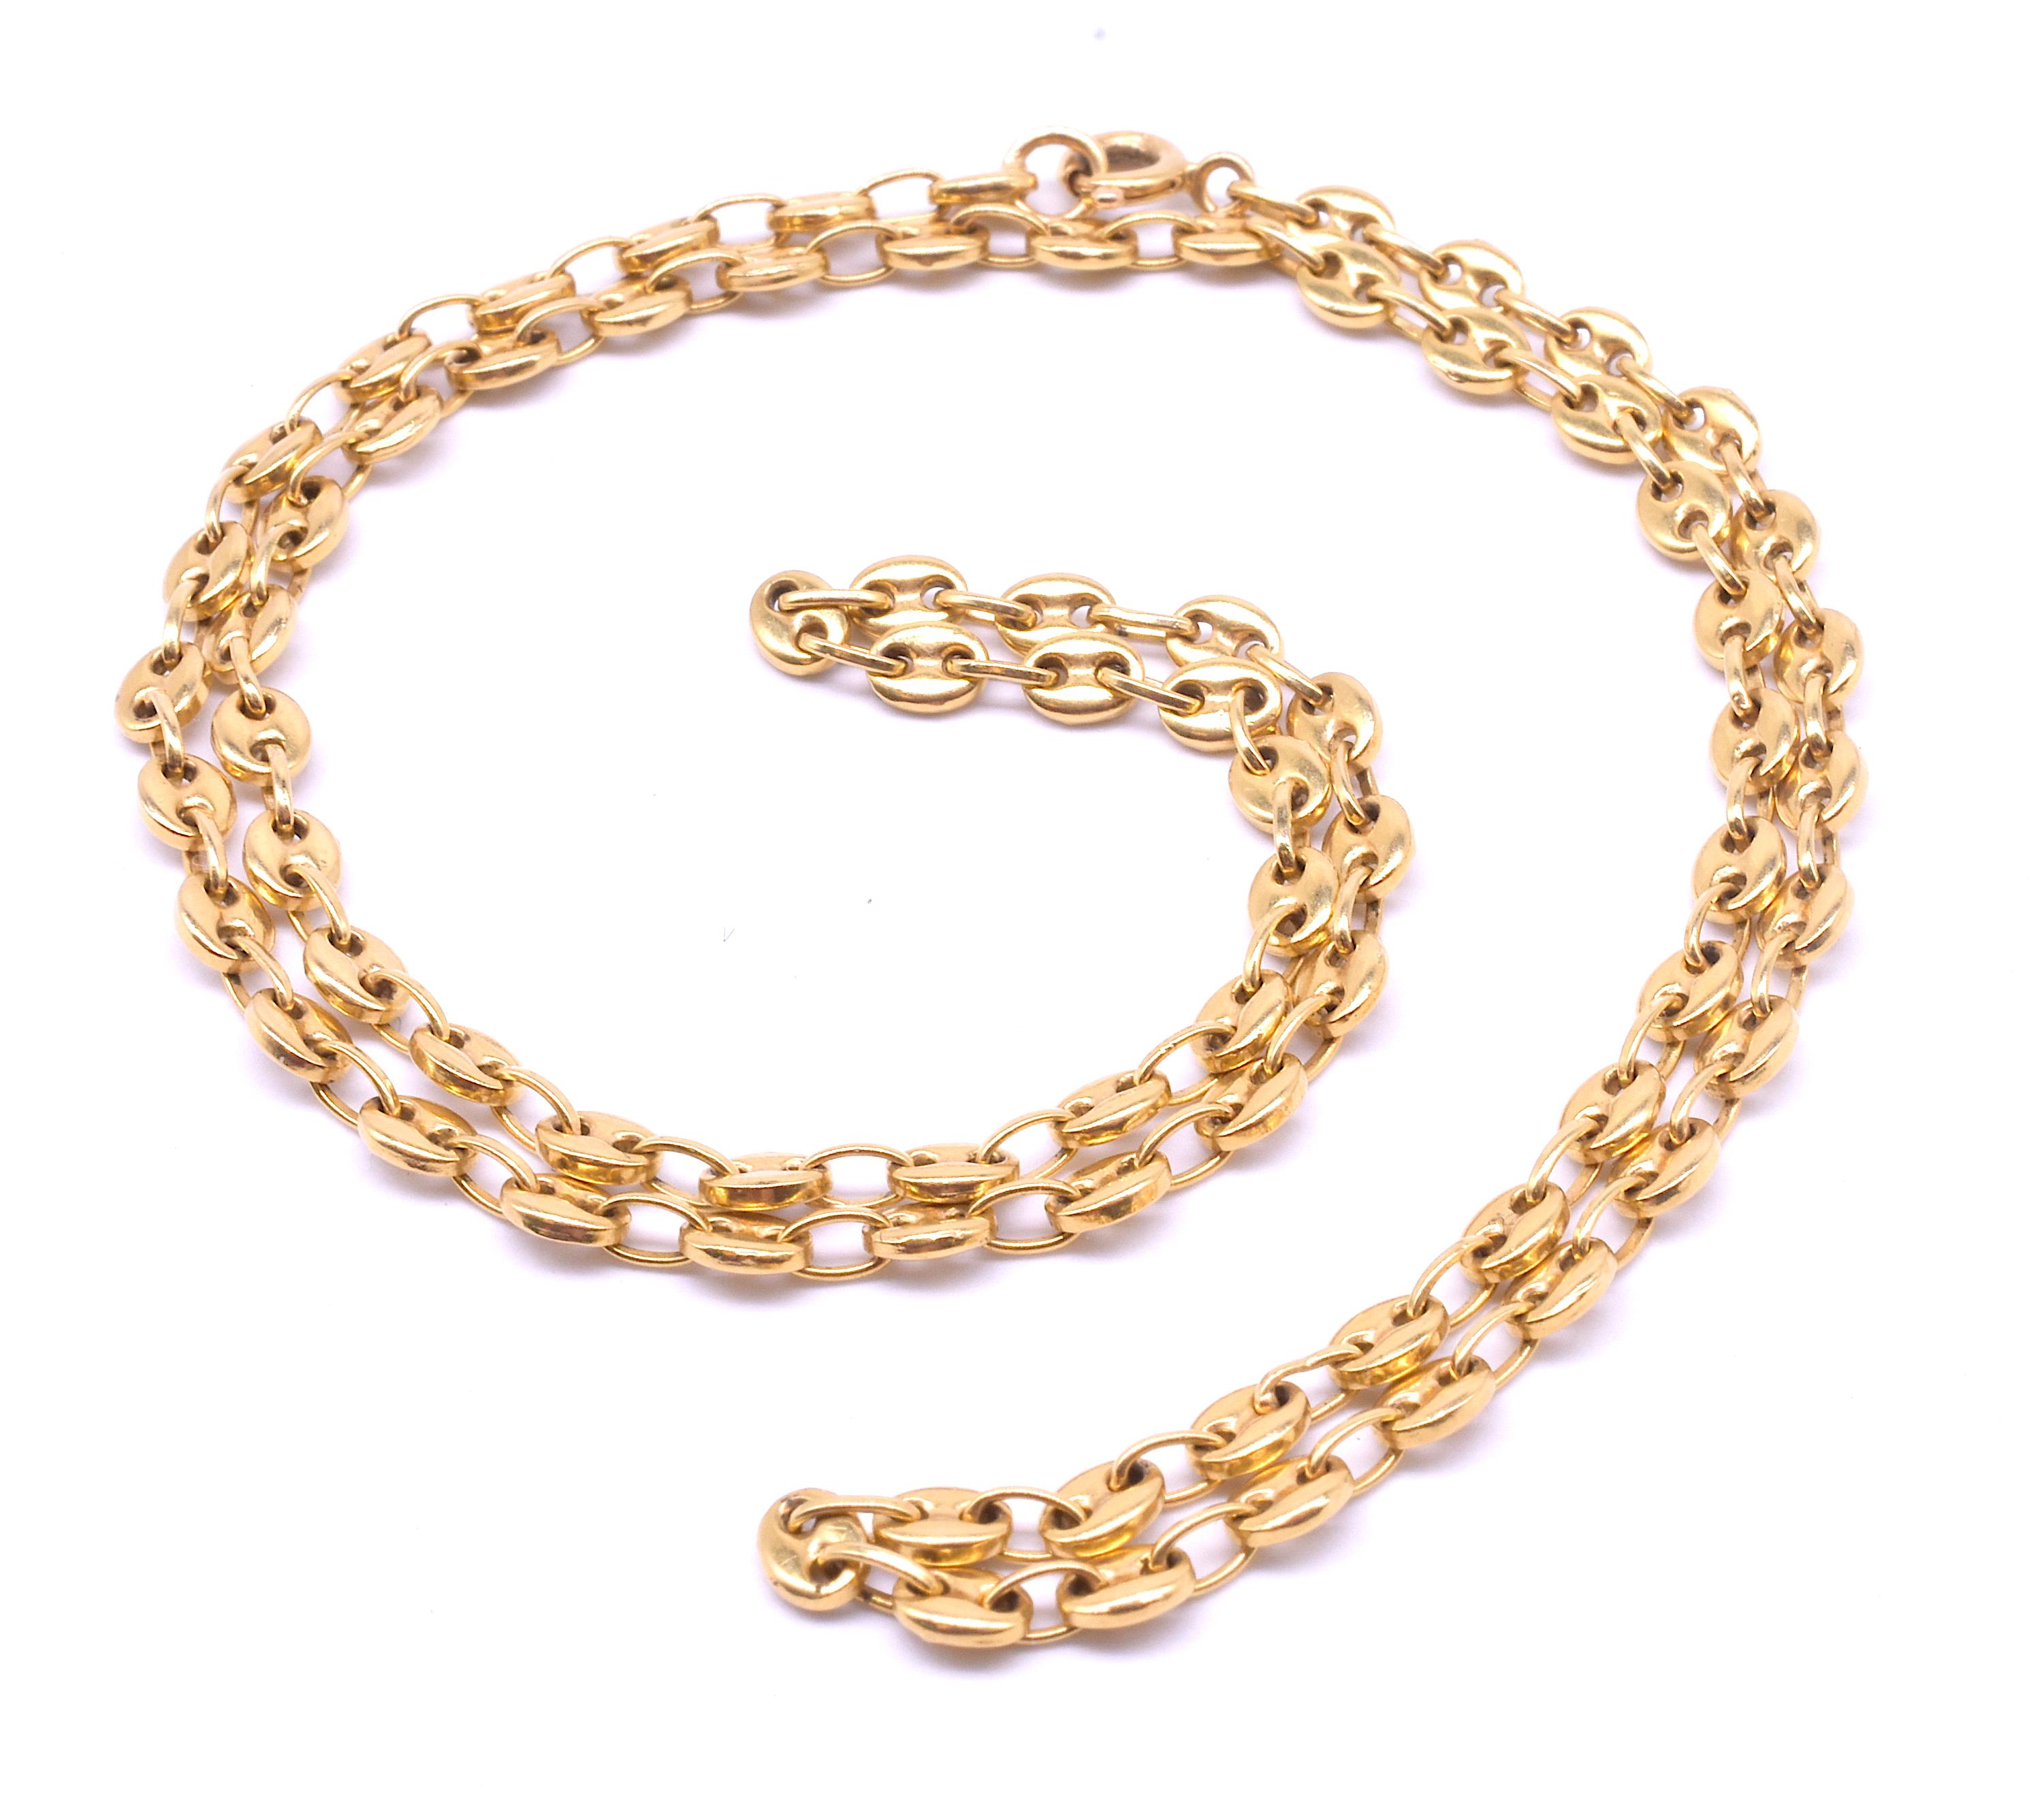 A Victorian 18K chain with classic anchor links, the anchor link chain with its nautical motif is a symbol of strength and robustness. Nautical link chains became popular during the late Victorian sporting craze, when the benefits of the outdoors